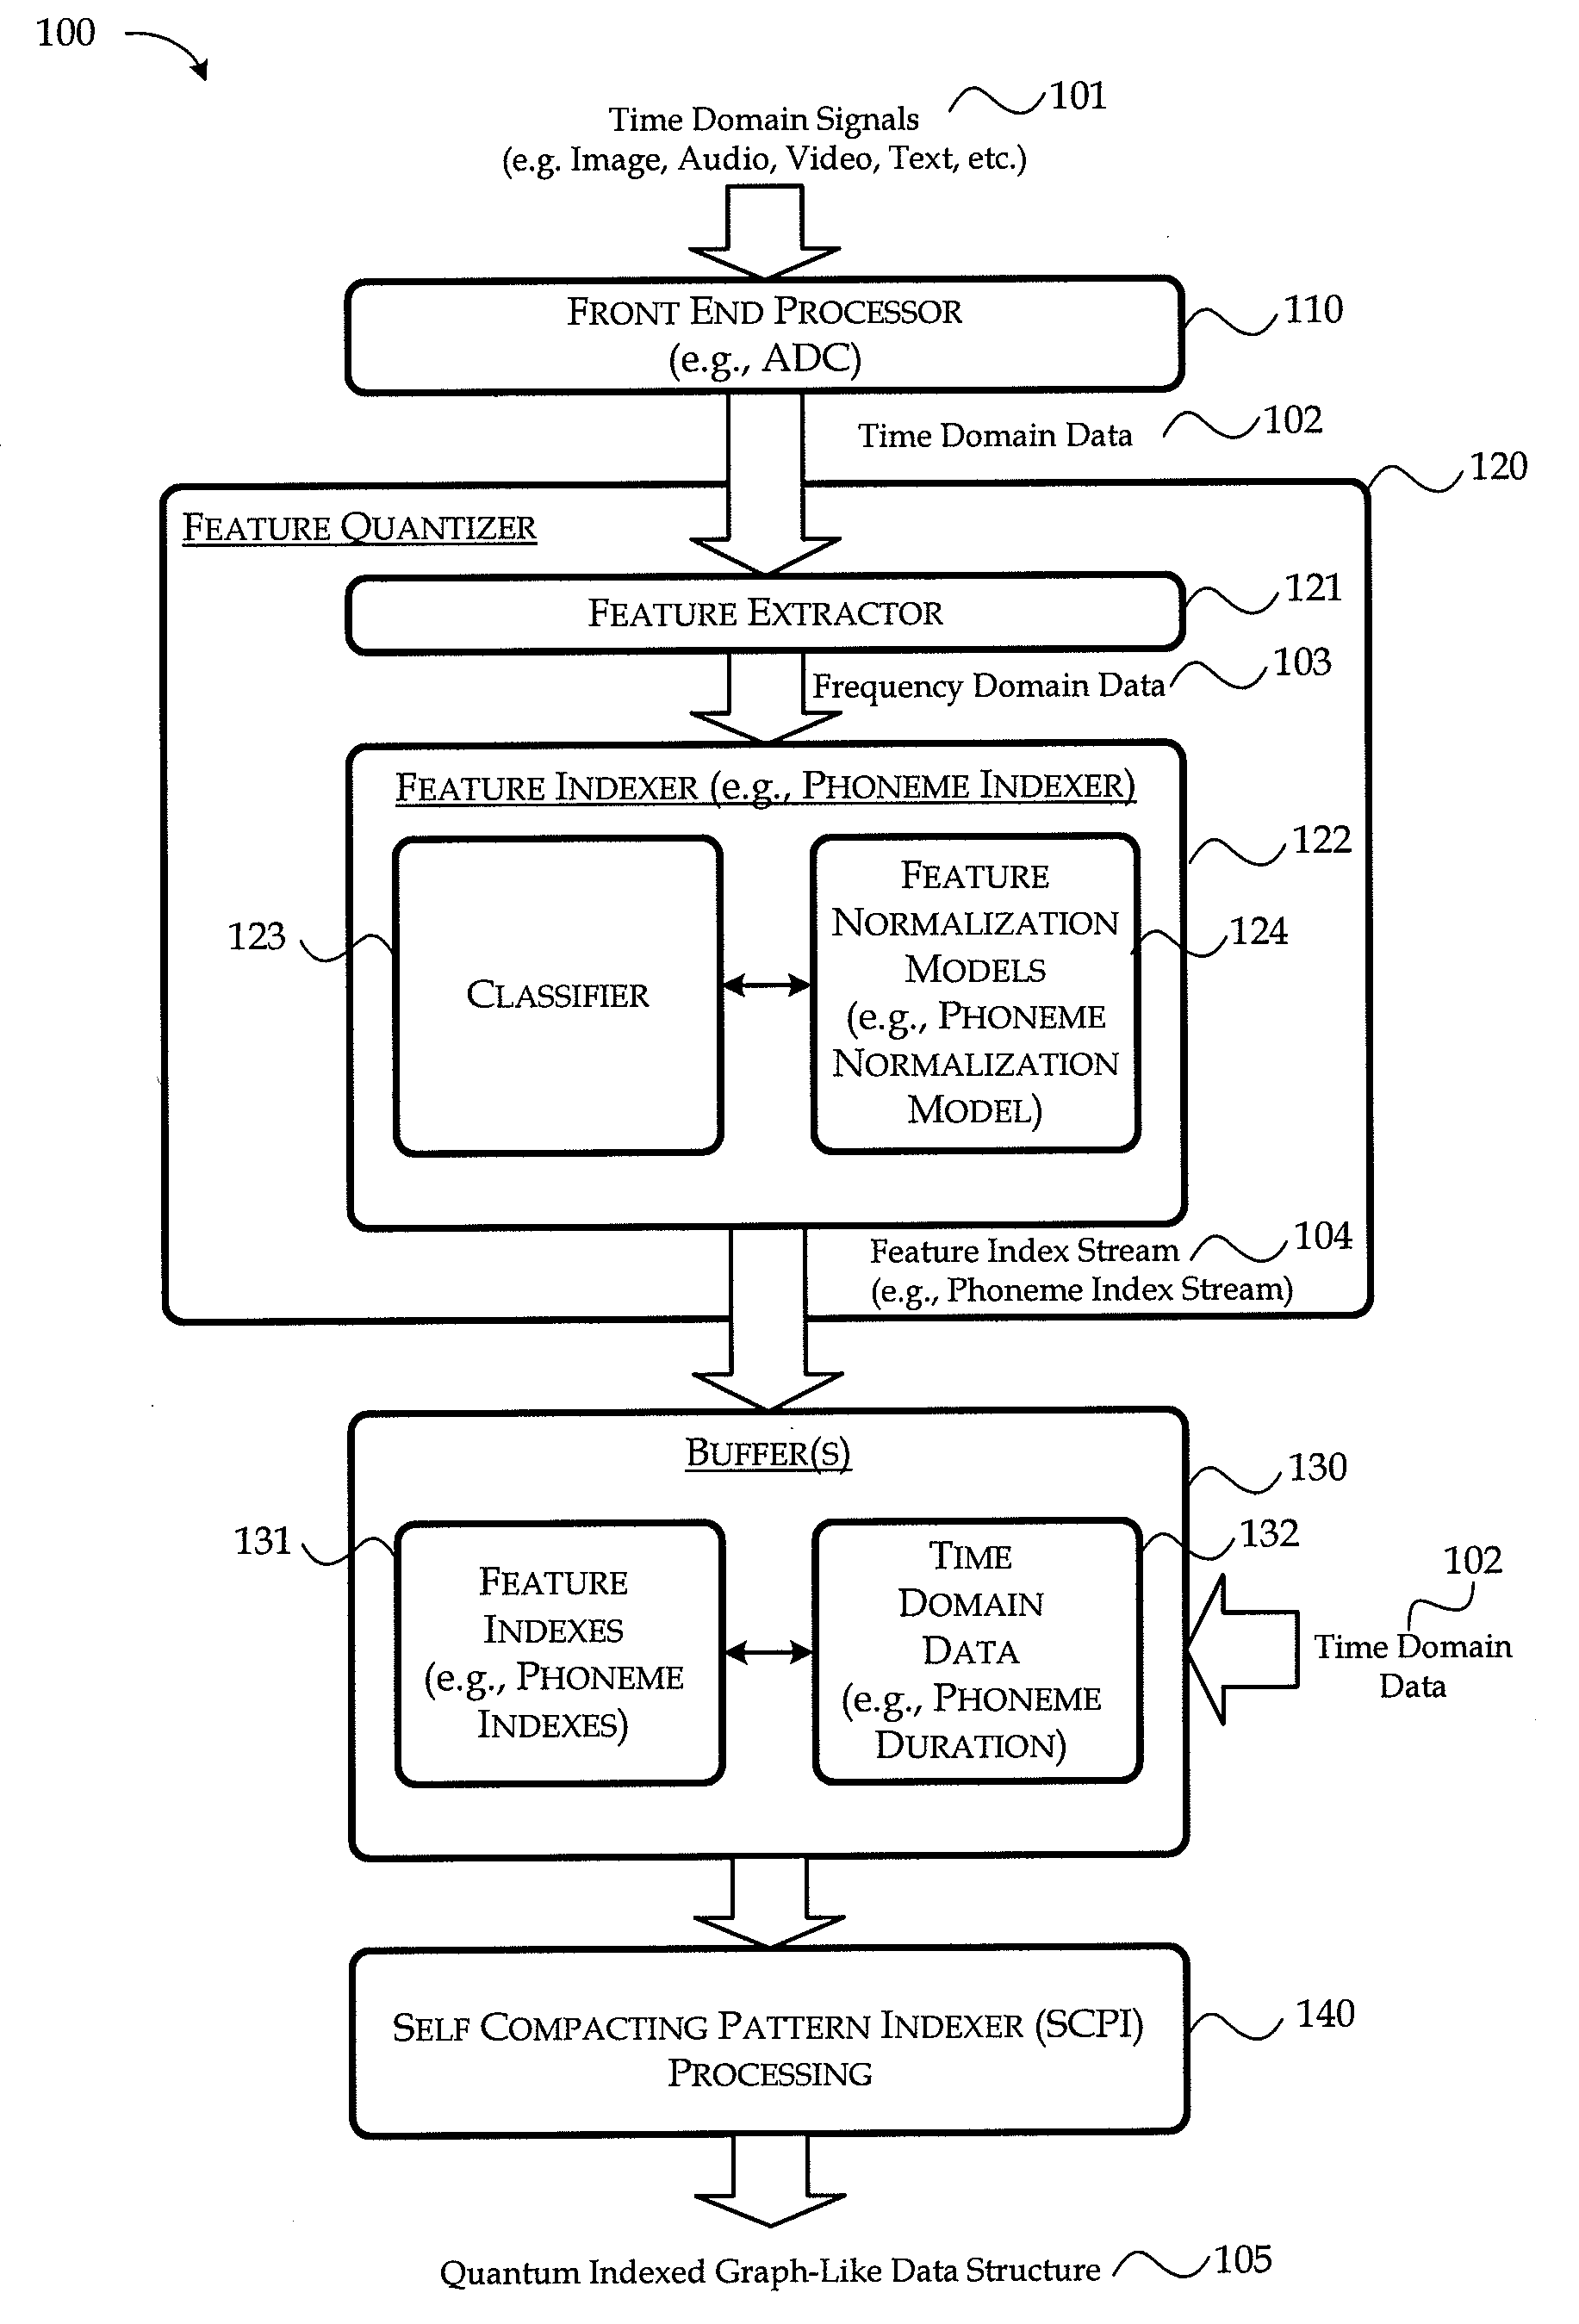 Self-Compacting Pattern Indexer:  Storing, Indexing and Accessing Information in a Graph-Like Data Structure